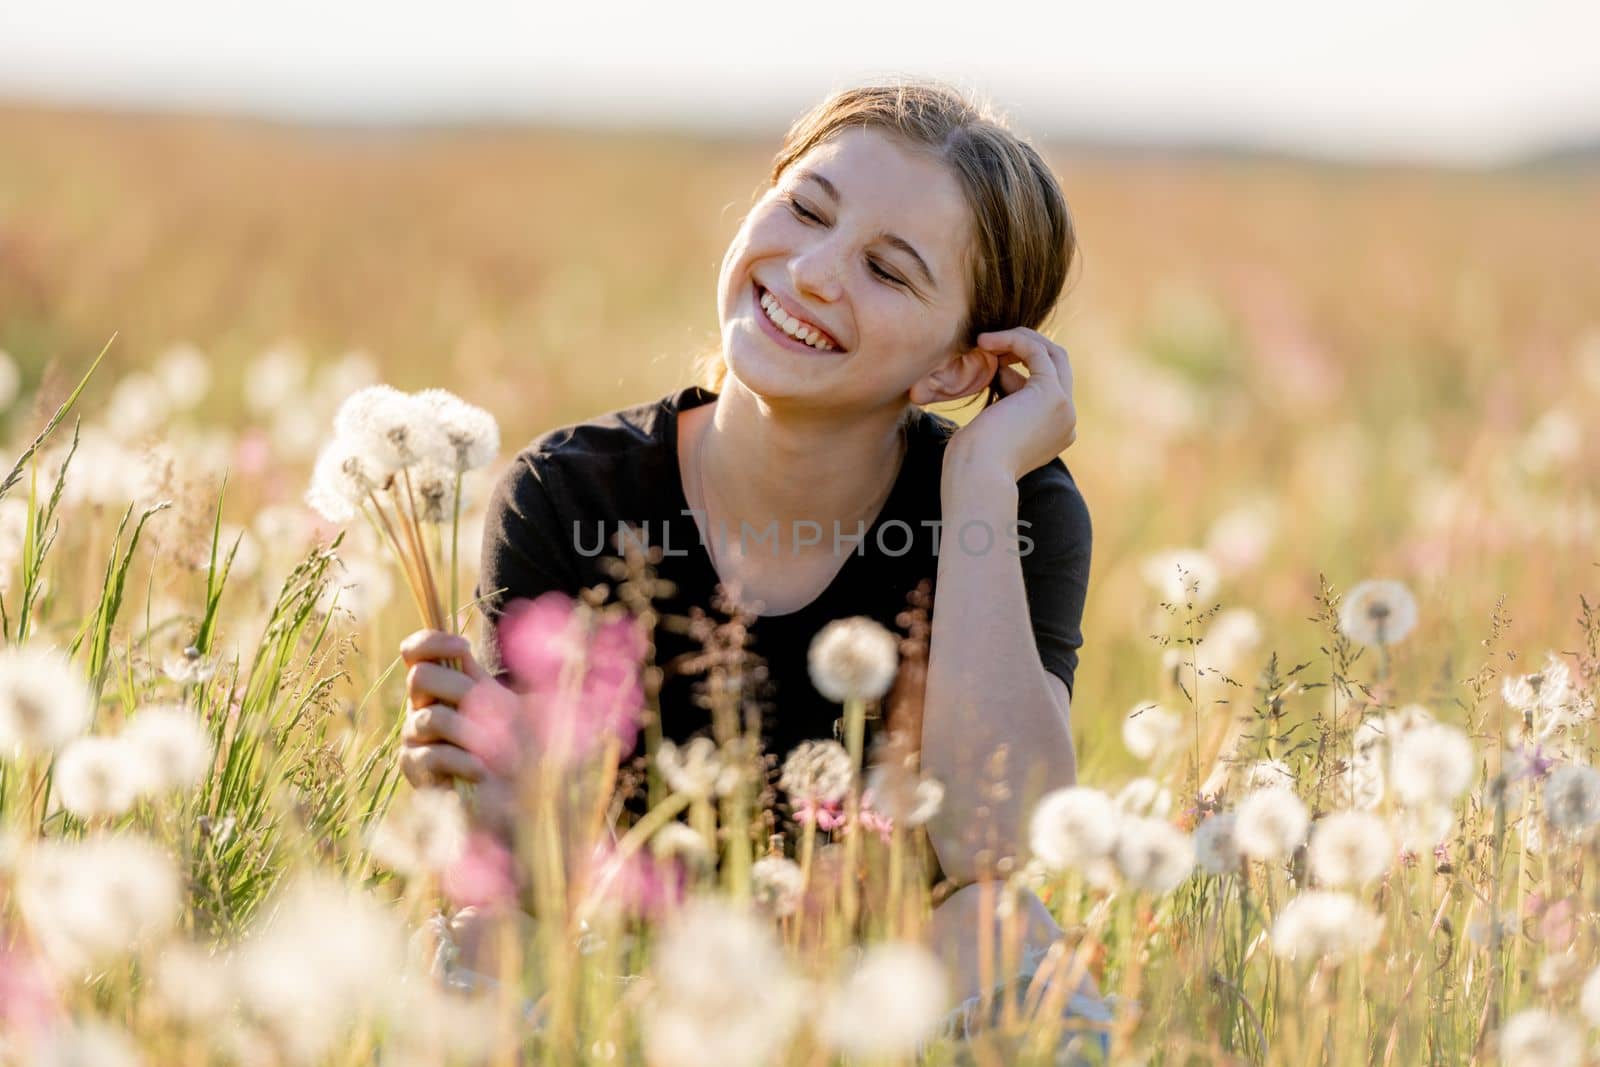 Pretty girl teenager sitting in field with flying dandelions and smiling. Beautiful young female person model at nature in sunny day portrait